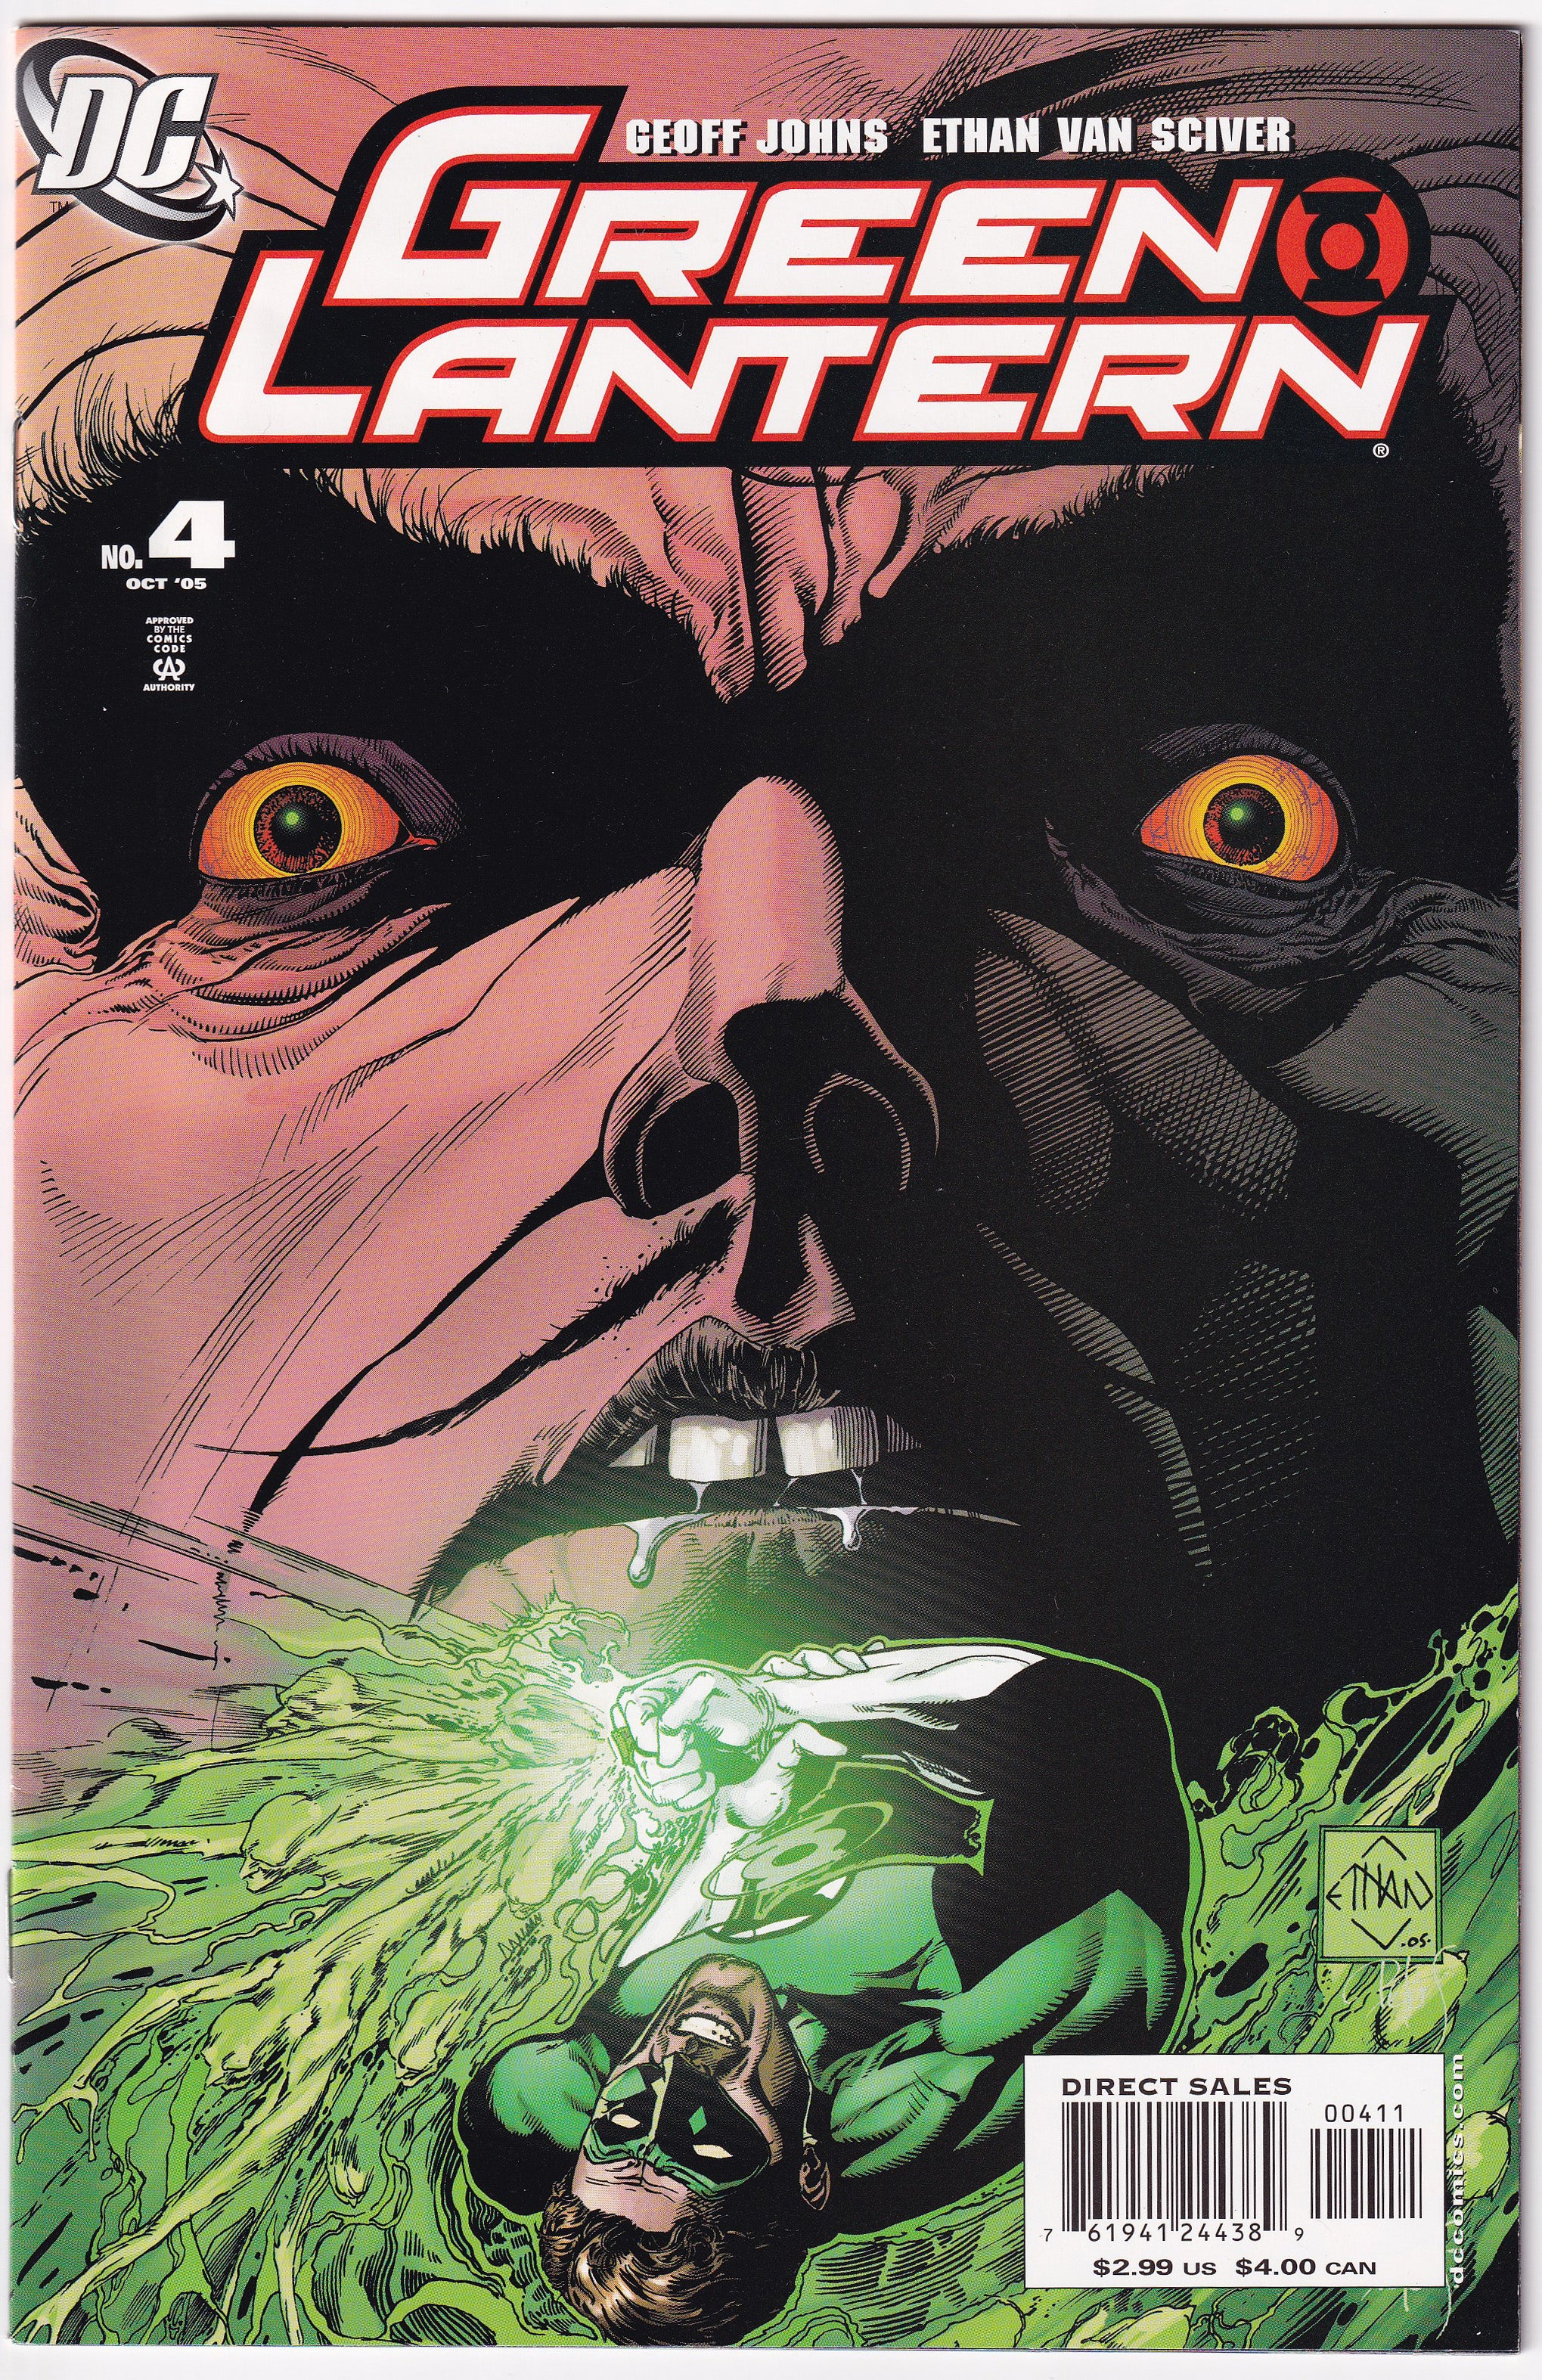 Photo of Green Lantern, Vol. 4 (2005)  Iss 4 comic sold by Stronghold Collectibles